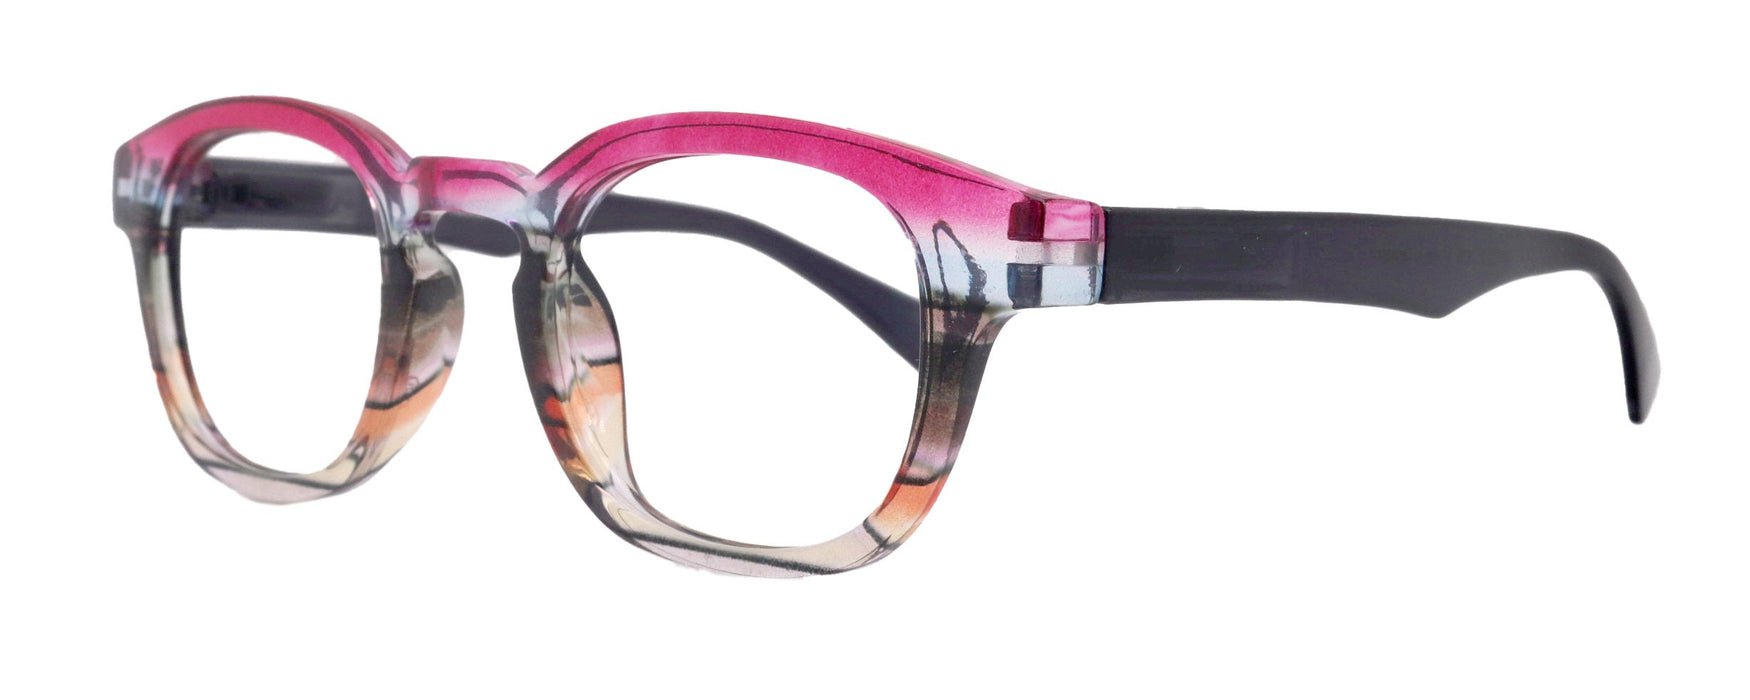 Premium Reading Glasses High End Readers +1.25 .. +4.00 (Rose, Brown Transparent) Round Optical Frames. NY Fifth Avenue.